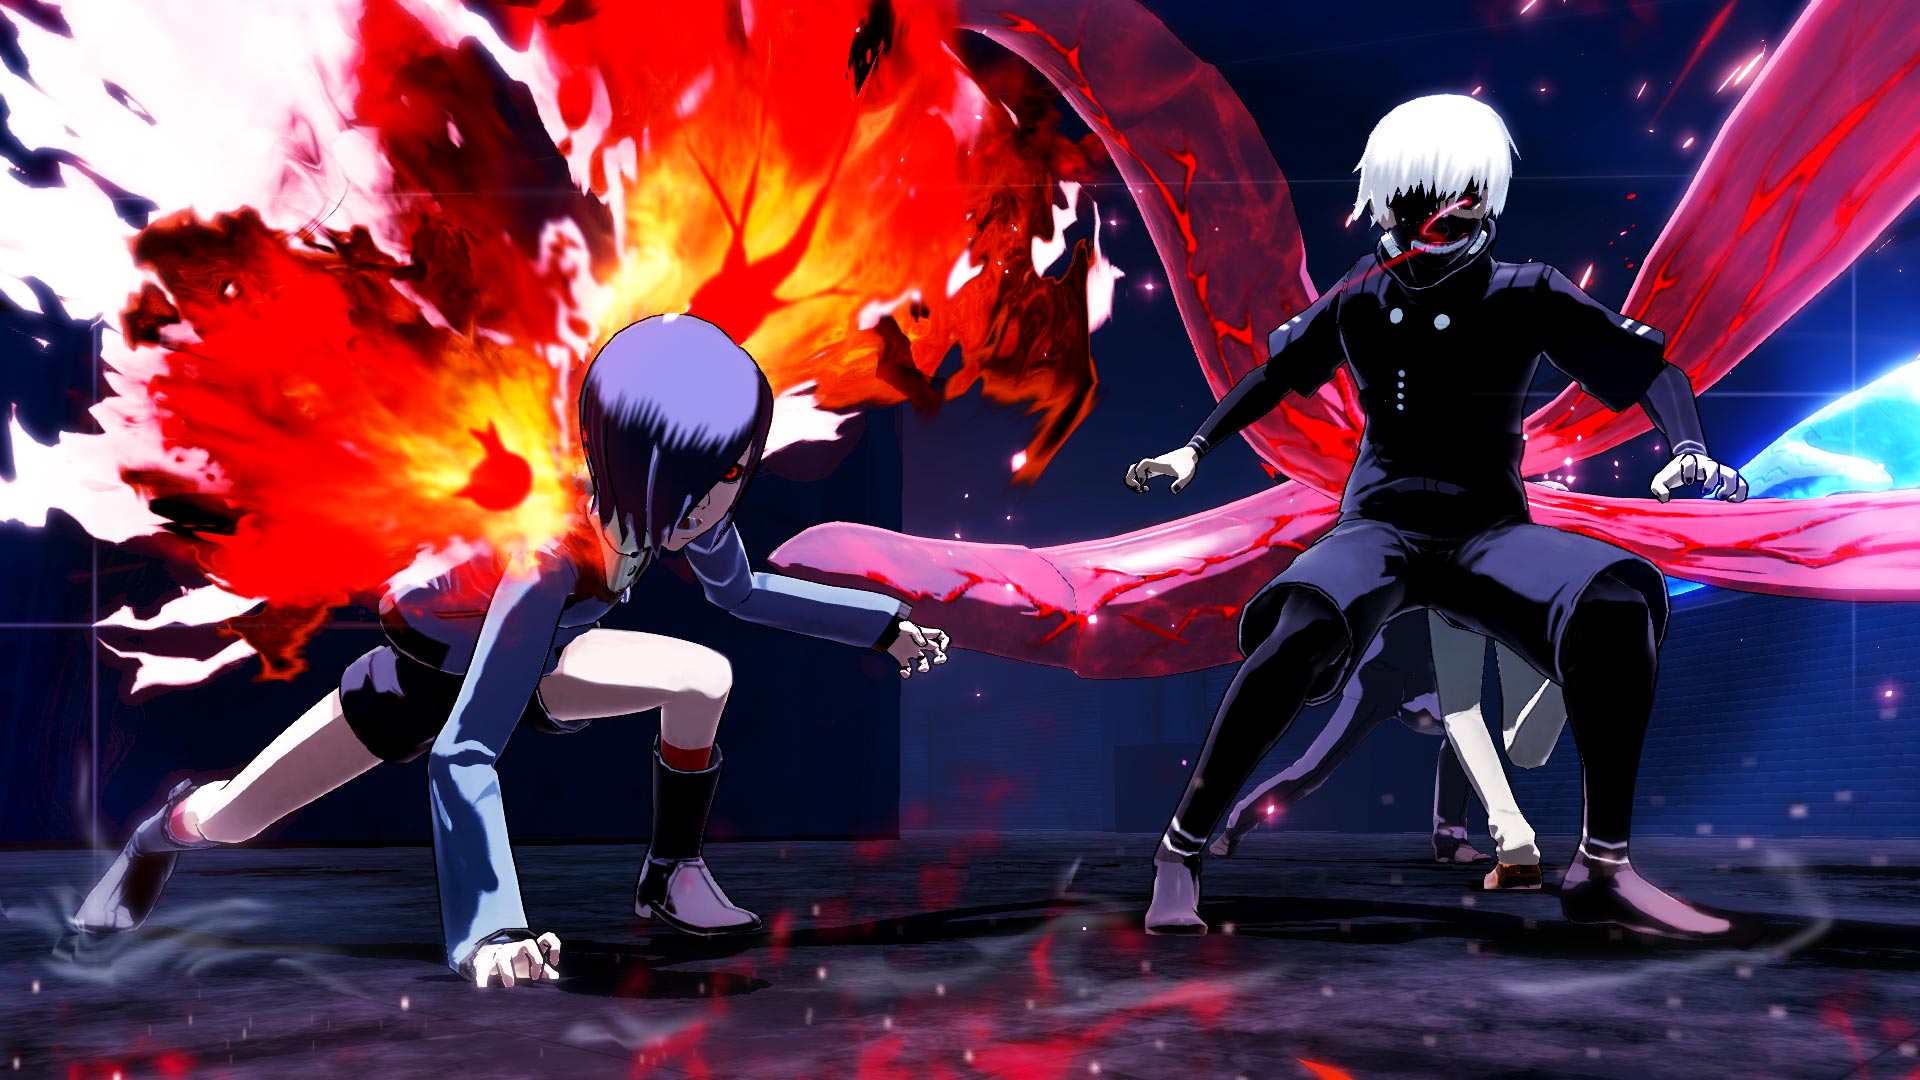 Tokyo Ghoul Re Call To Exist For Ps4 Buy Cheaper In Official Store Psprices Uk